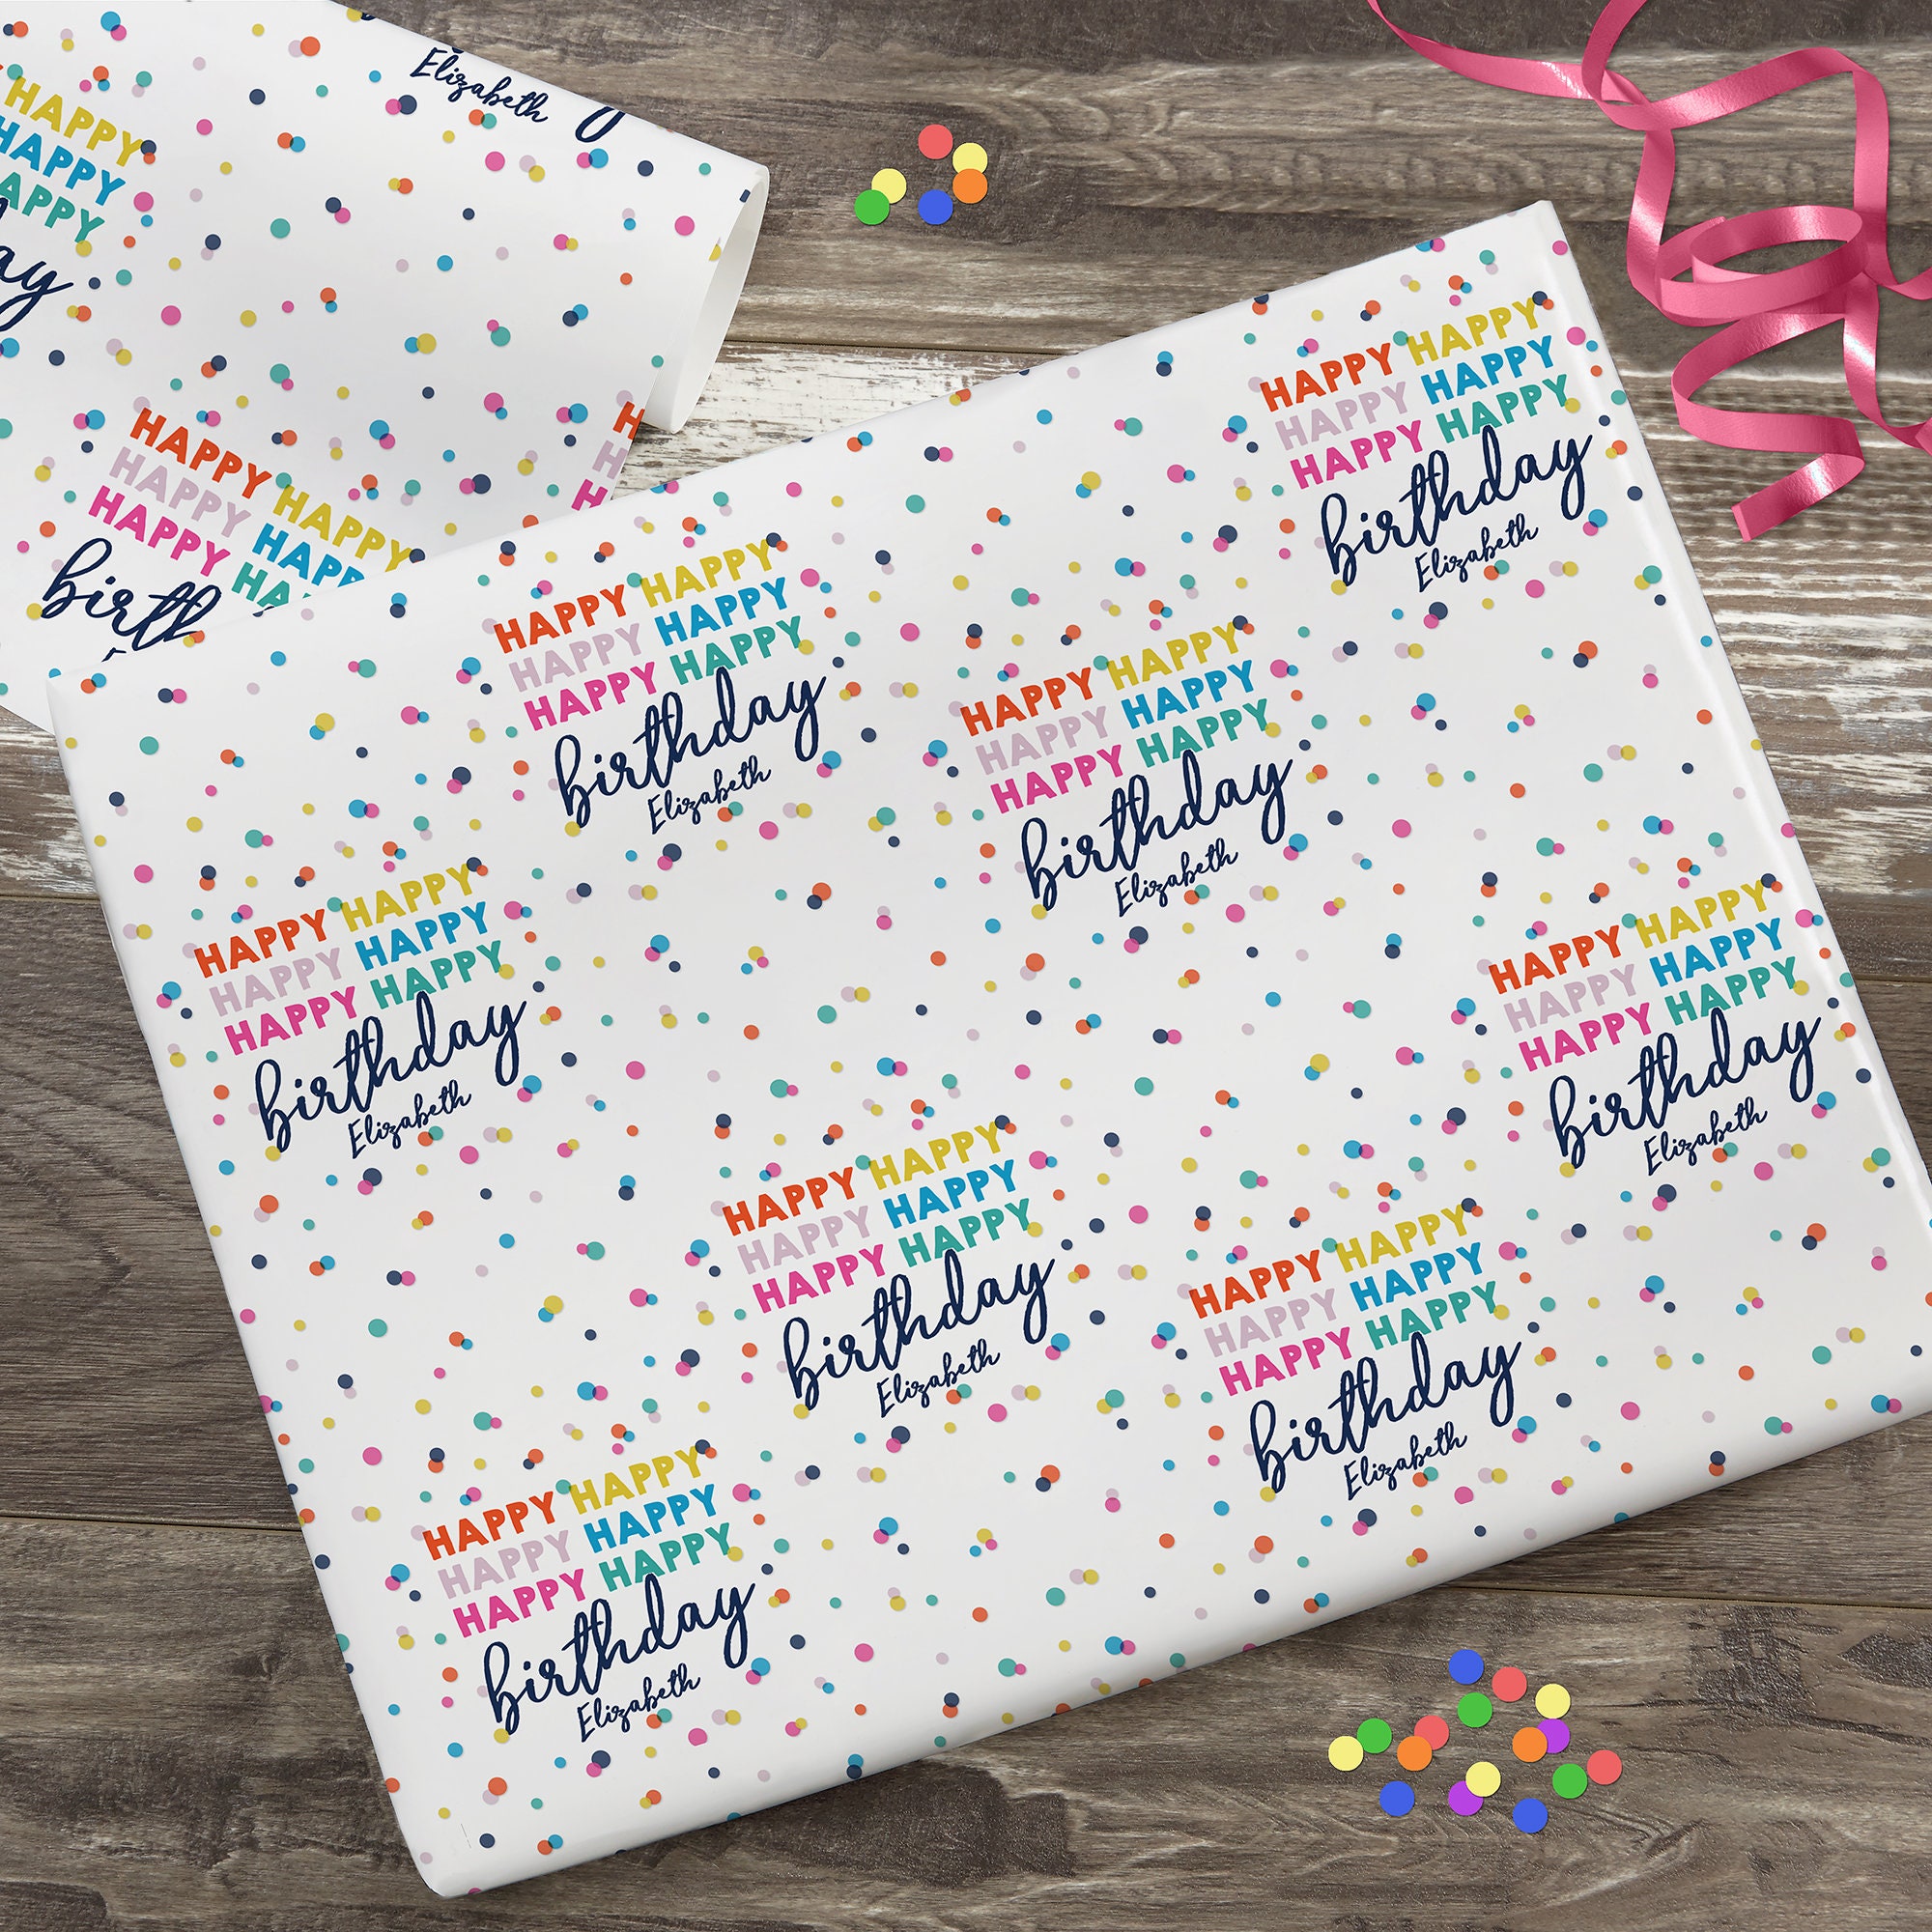 Happy Happy Birthday Personalized Wrapping Paper, Custom Wrapping Paper,  Birthday Gift Wrap, Wrapping Paper for Gifts, Custom Gift Wrap 